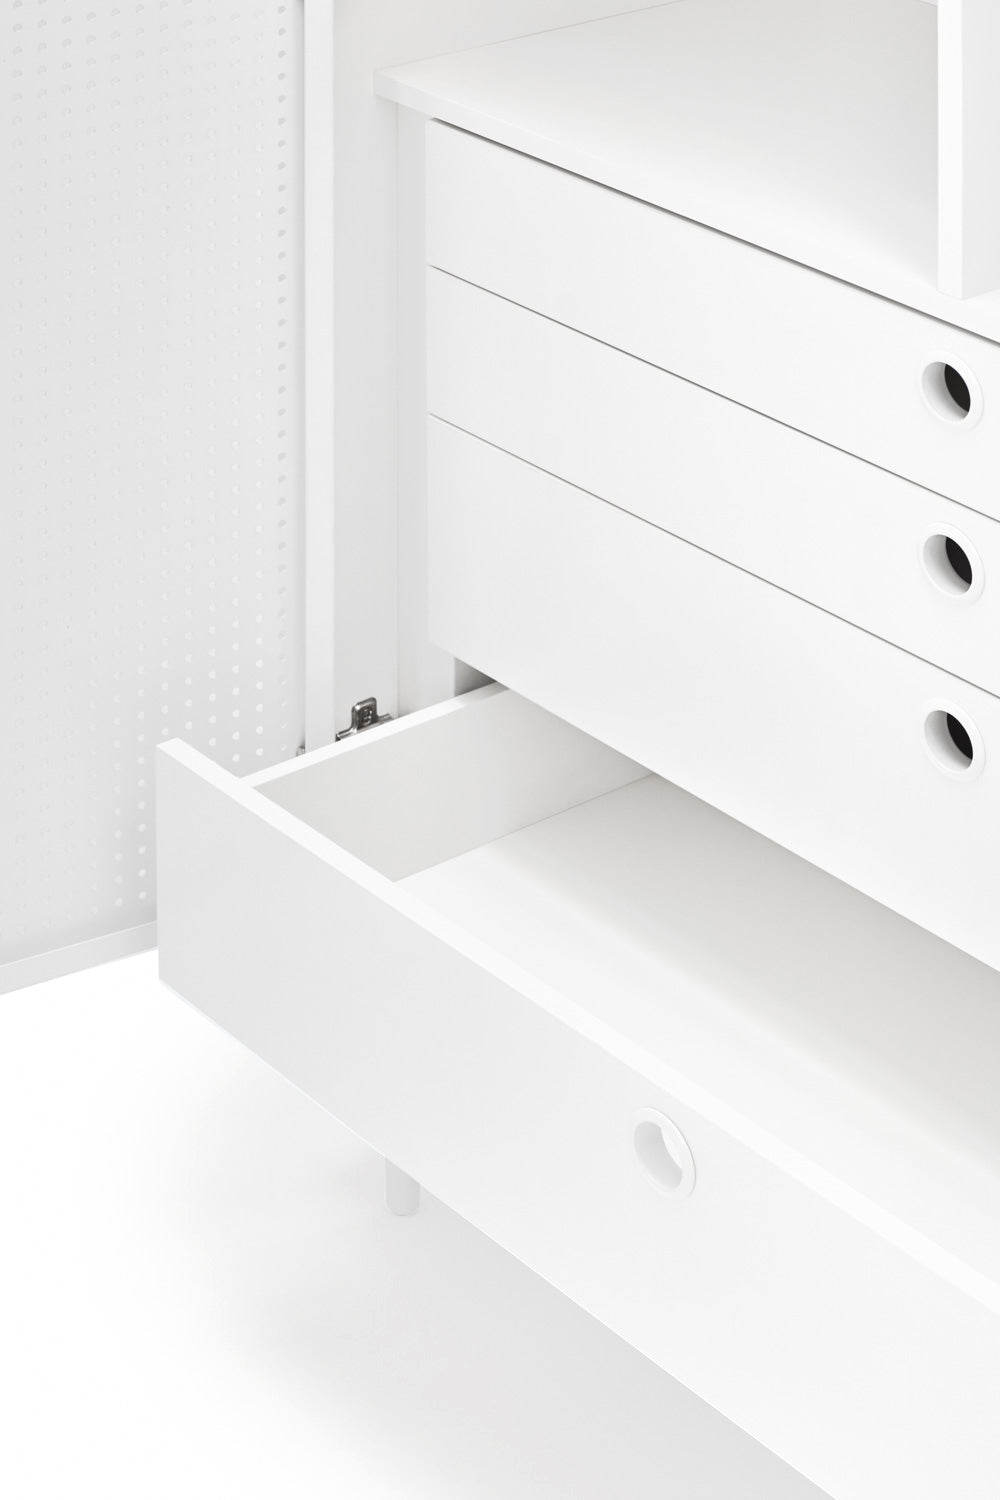 PUNTO high chest of drawers white